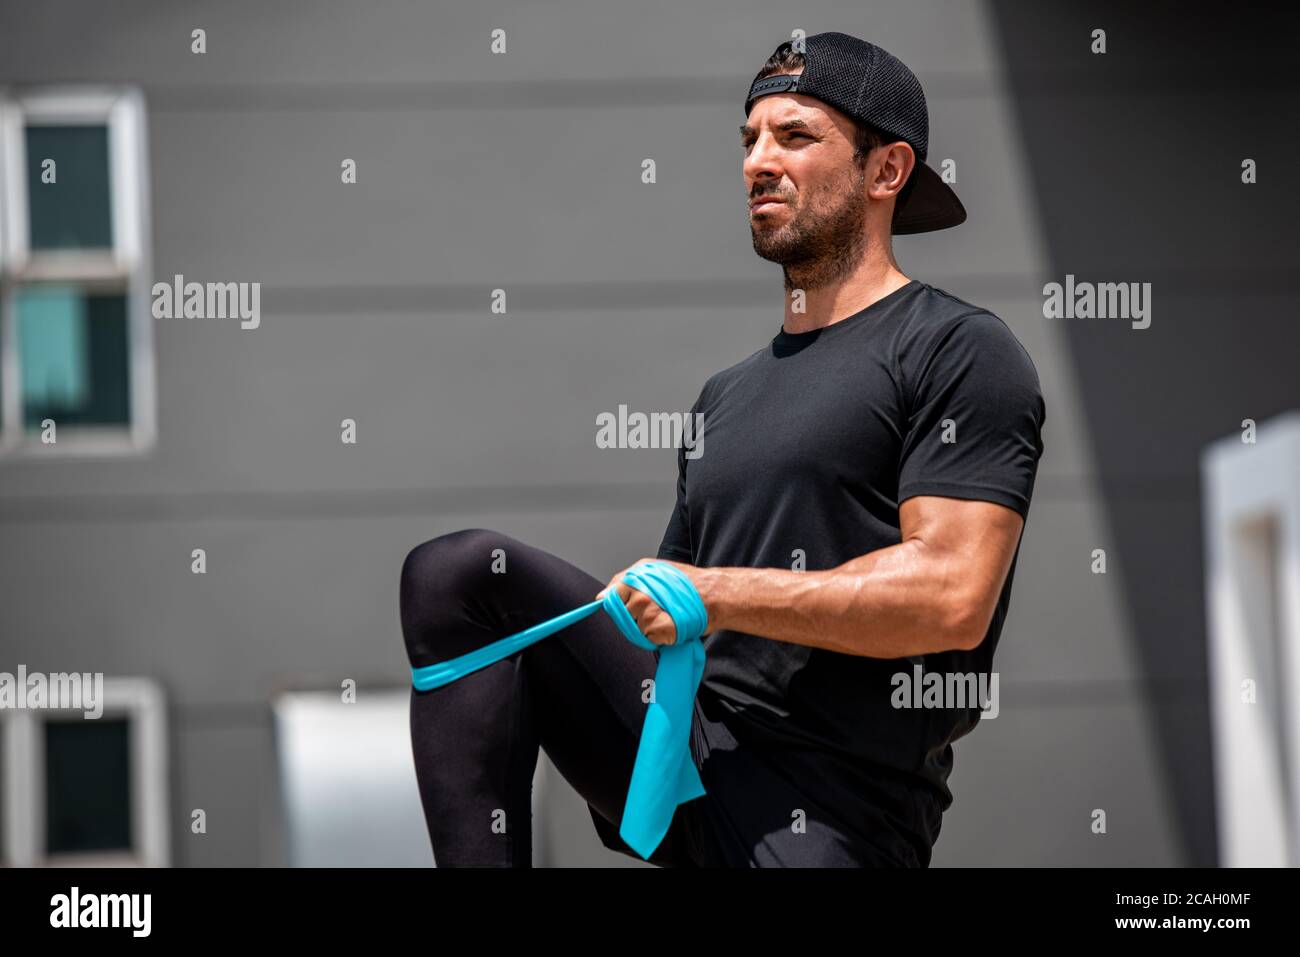 Handsome Latino sports man warming up with resistance band before exercise outdoors at home Stock Photo